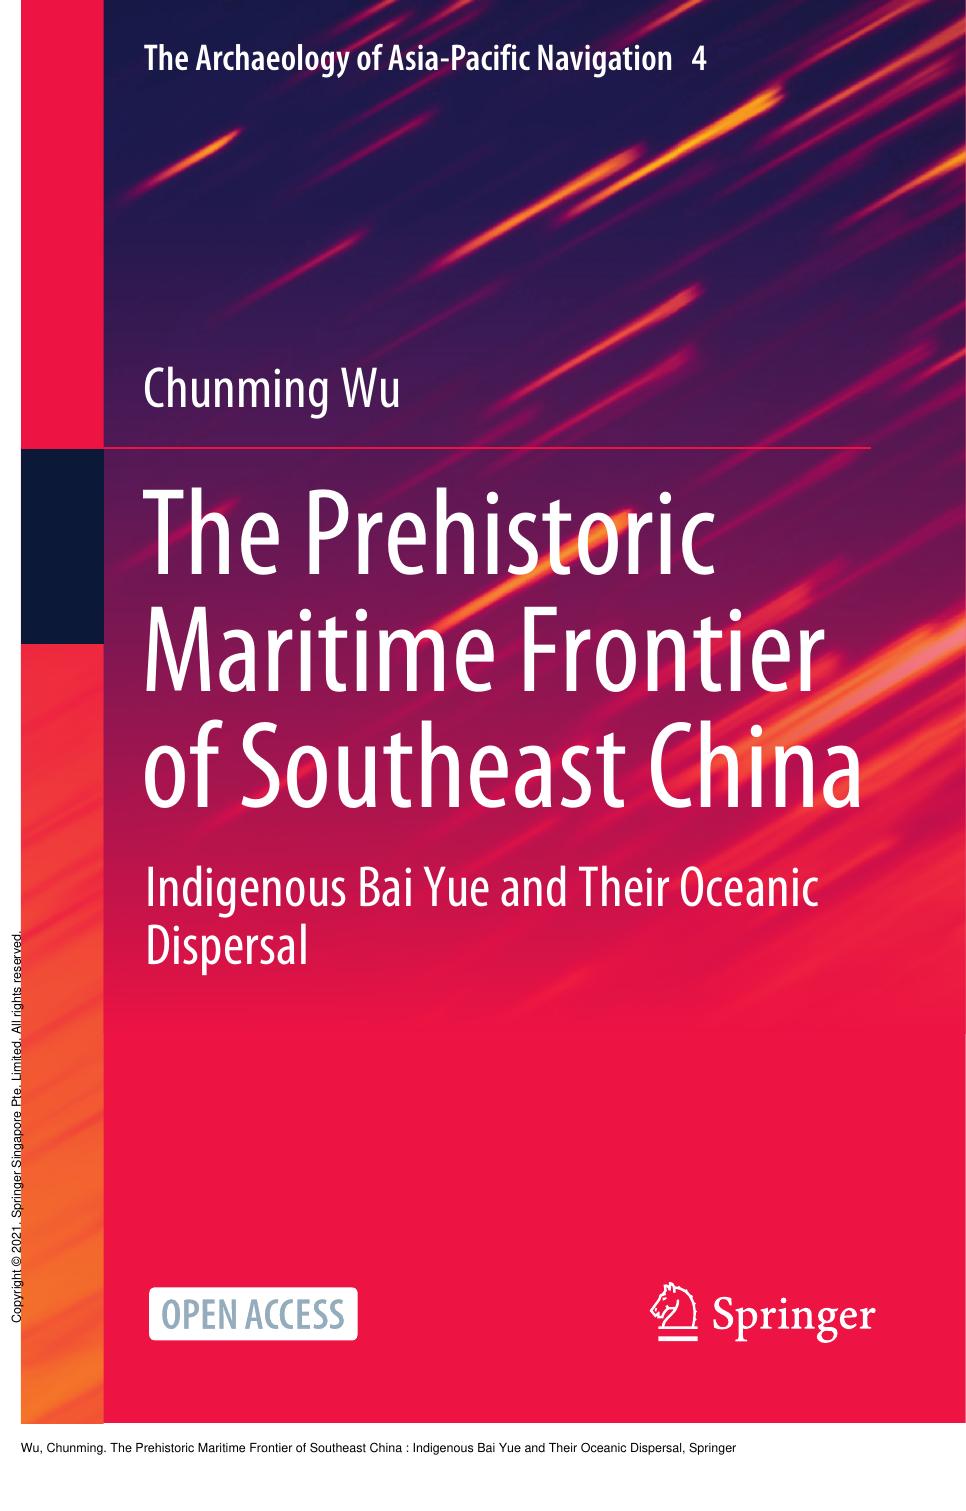 The Prehistoric Maritime Frontier of Southeast China: Indigenous Bai Yue and Their Oceanic Dispersal by Chunming Wu